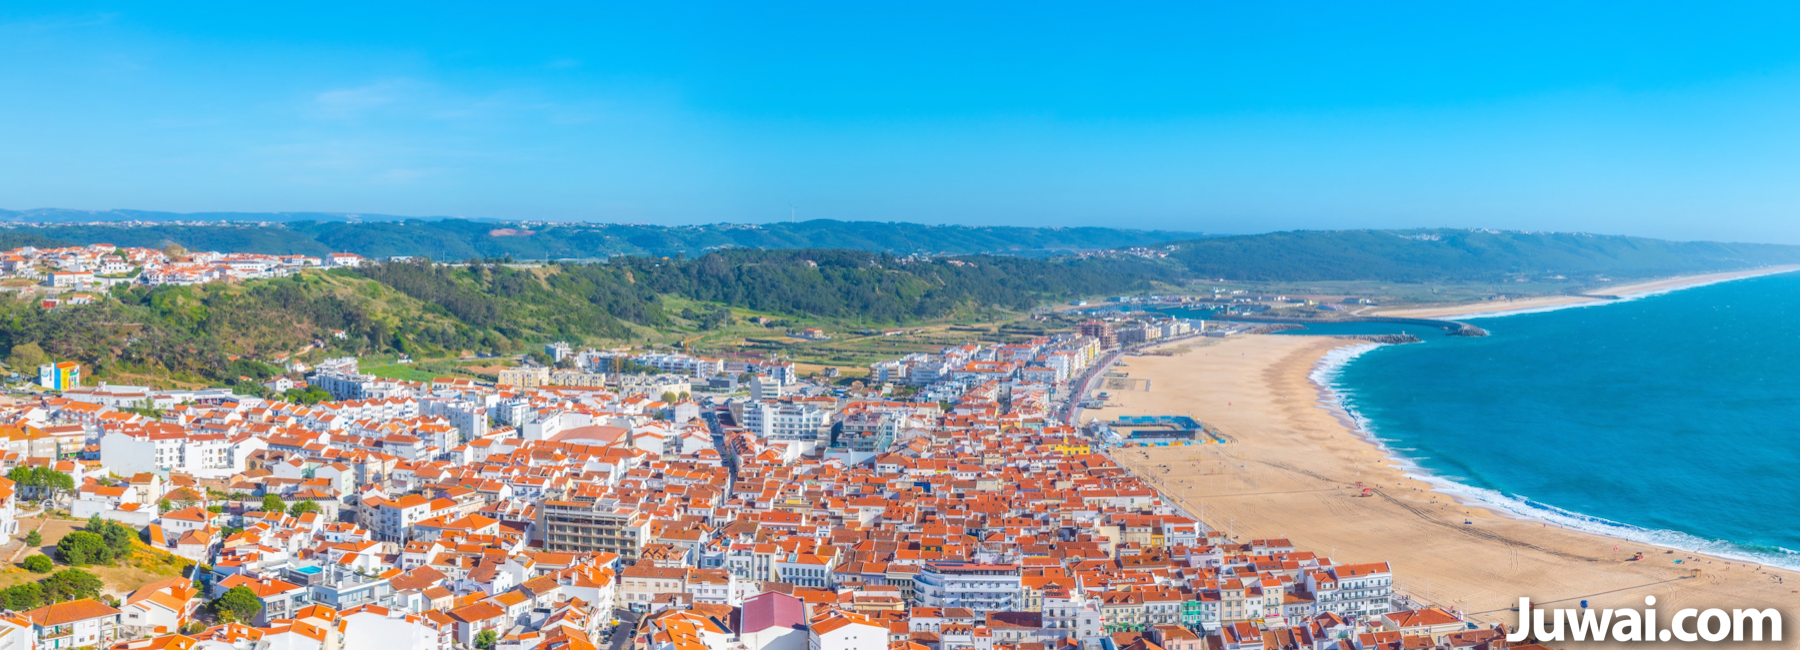 Foreign buyers interested in Portugal's real estate must act now ...